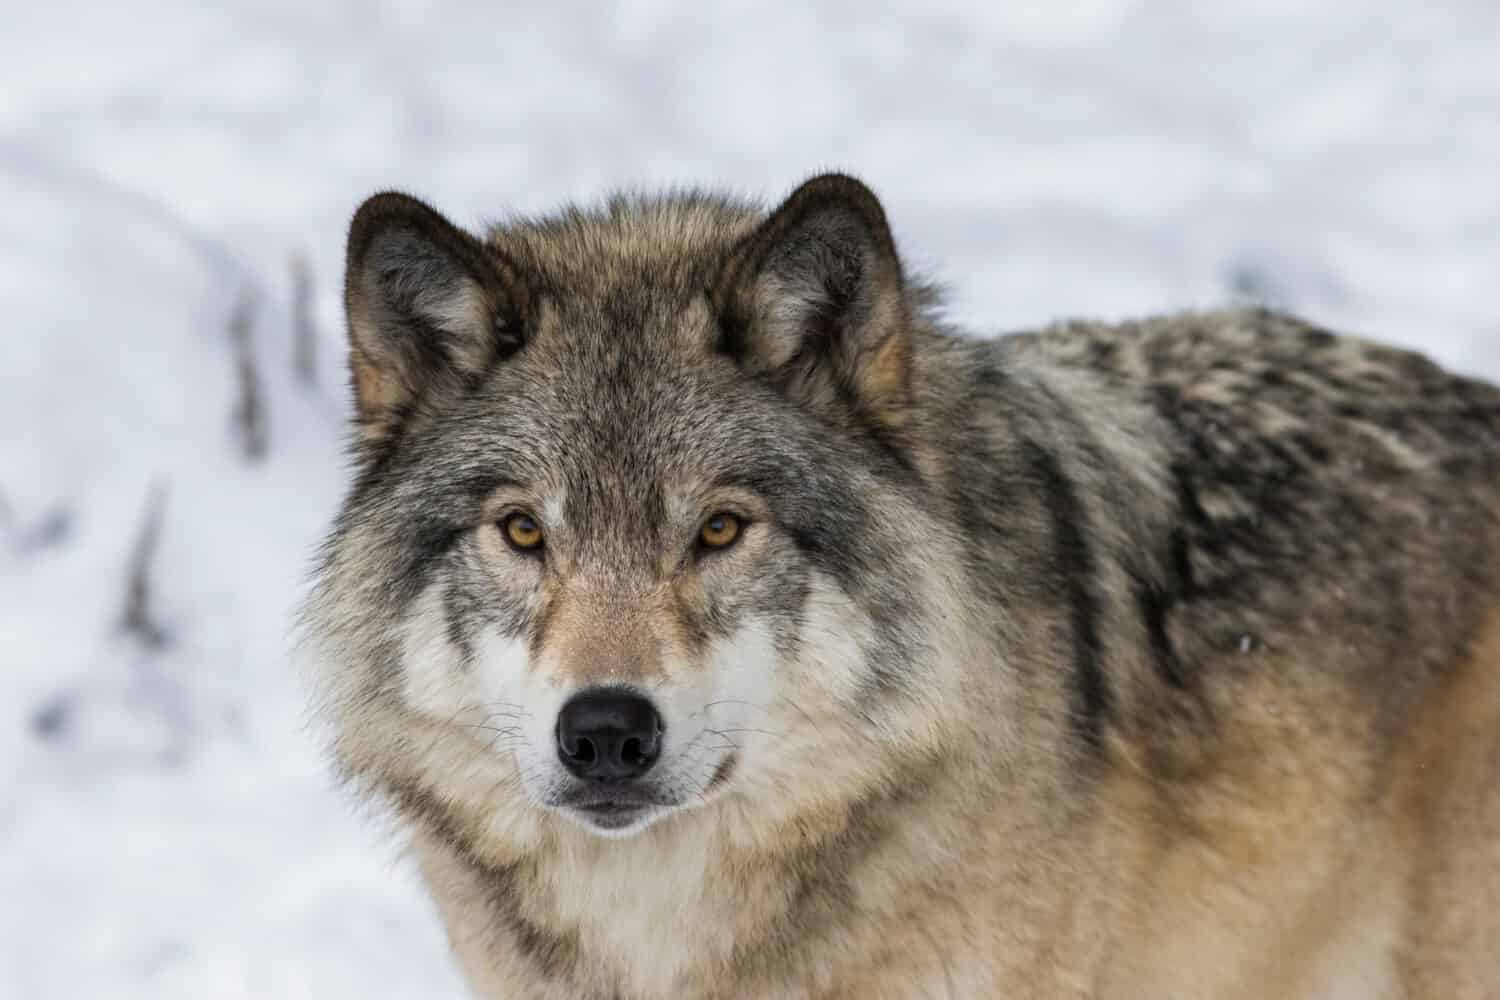 Wolf portrait. Northwestern wolf (Canis lupus occidentalis), also known as the Canadian timber wolf